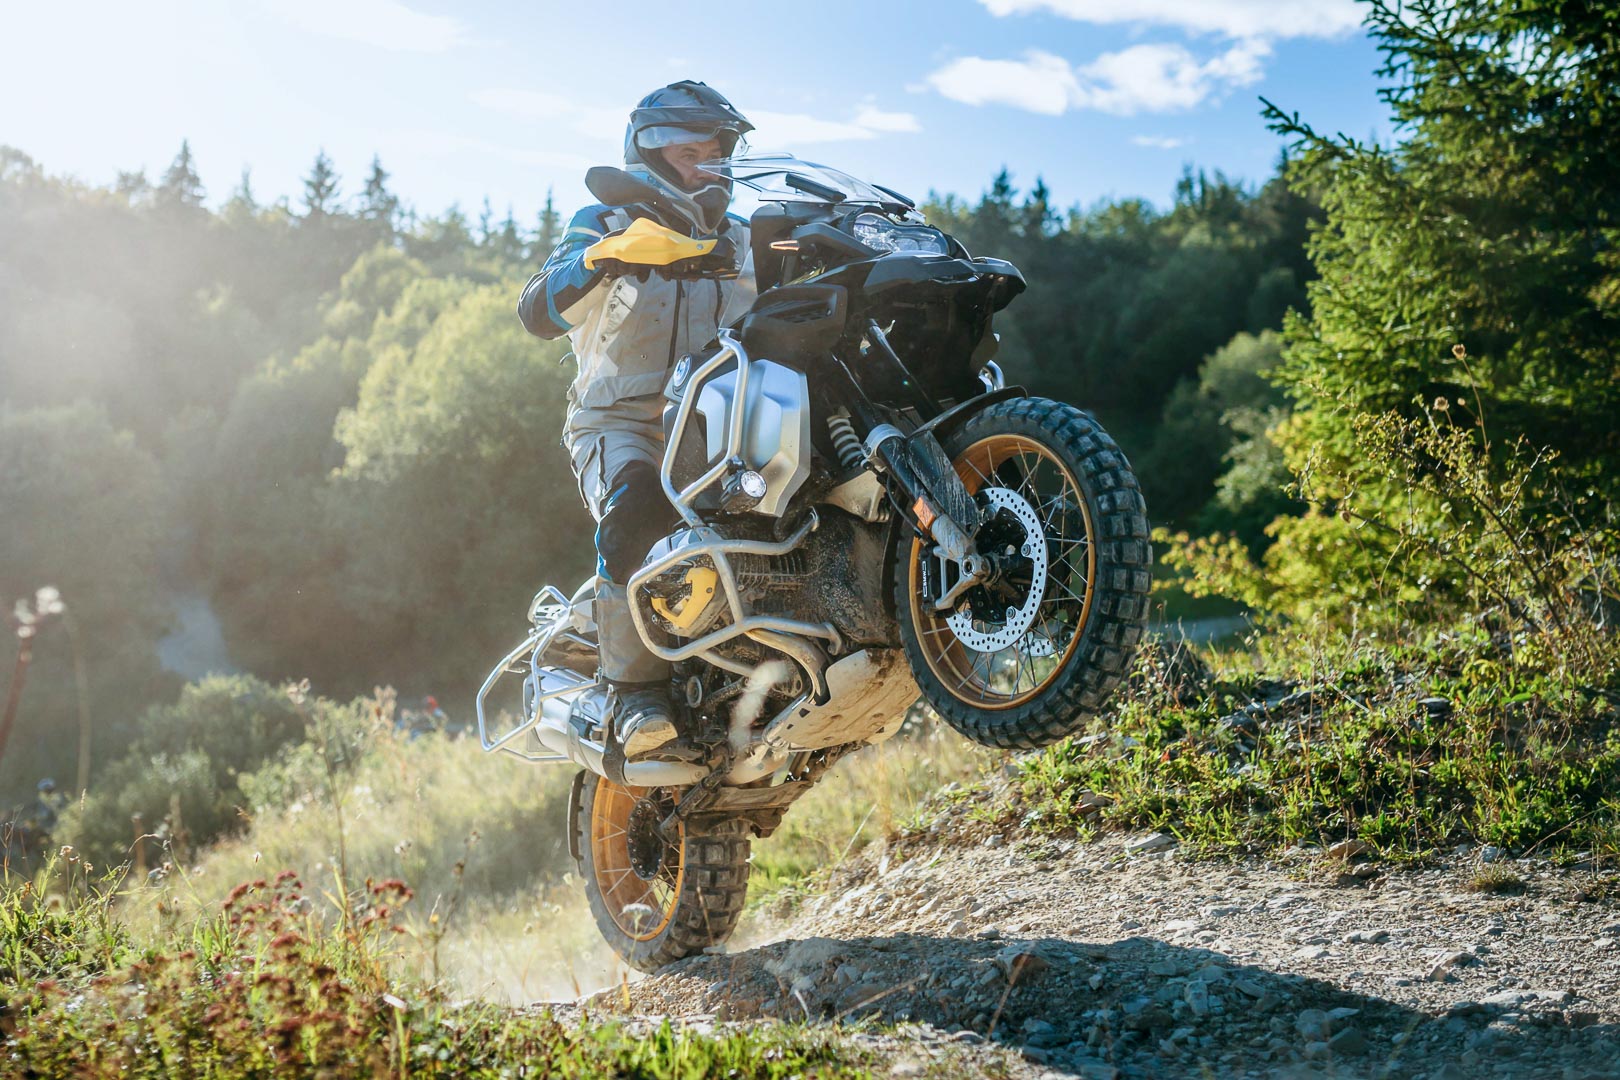 BMW R 1250 GS vs R 1200 GS: What Changed for the Better? – Lone Rider